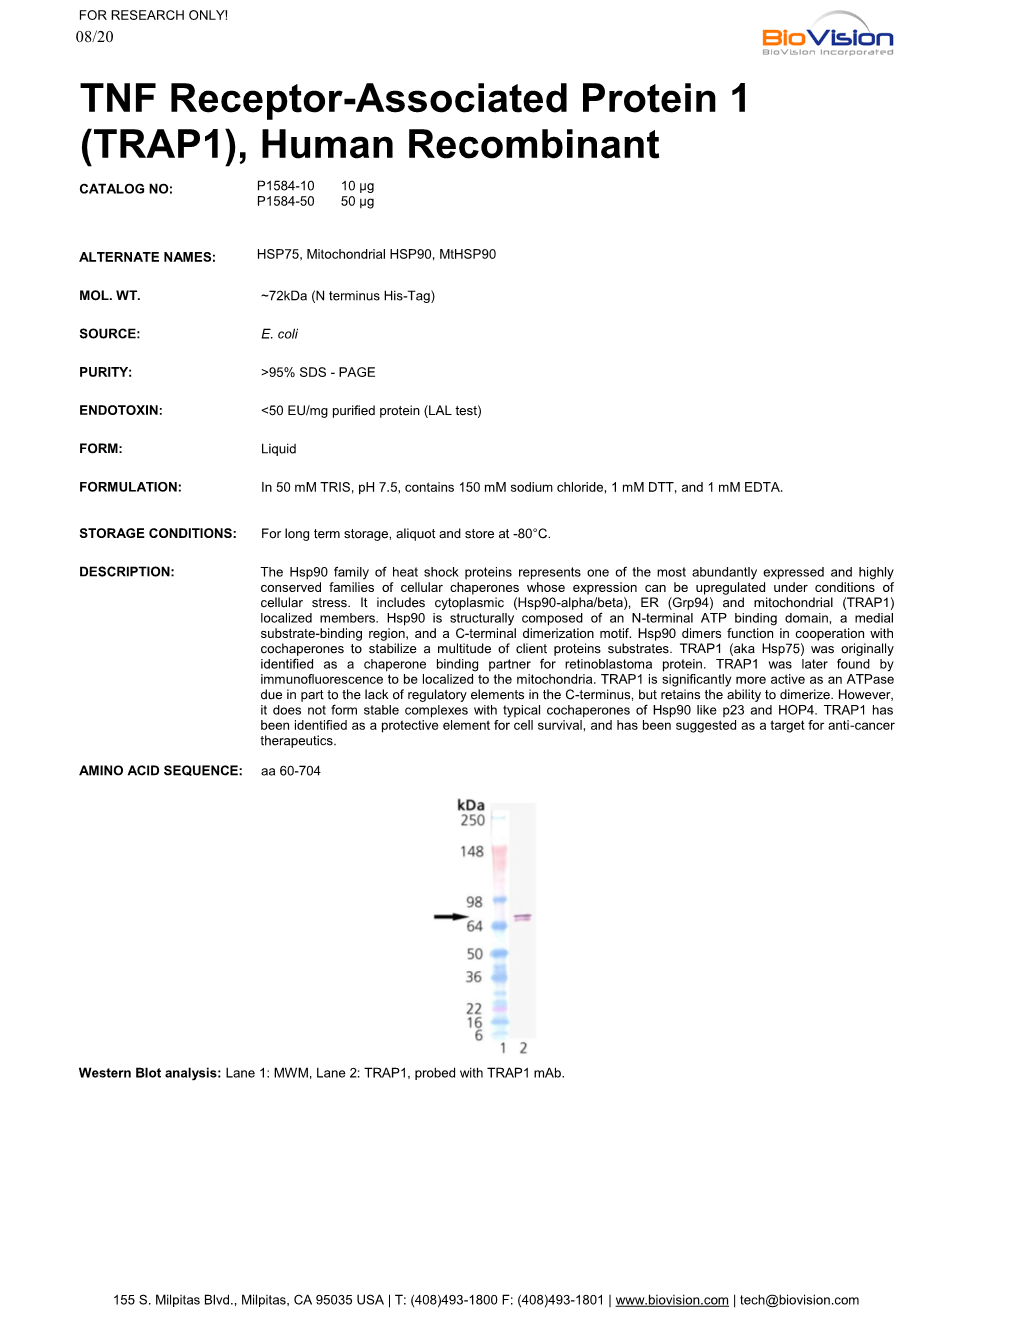 TNF Receptor-Associated Protein 1 (TRAP1), Human Recombinant